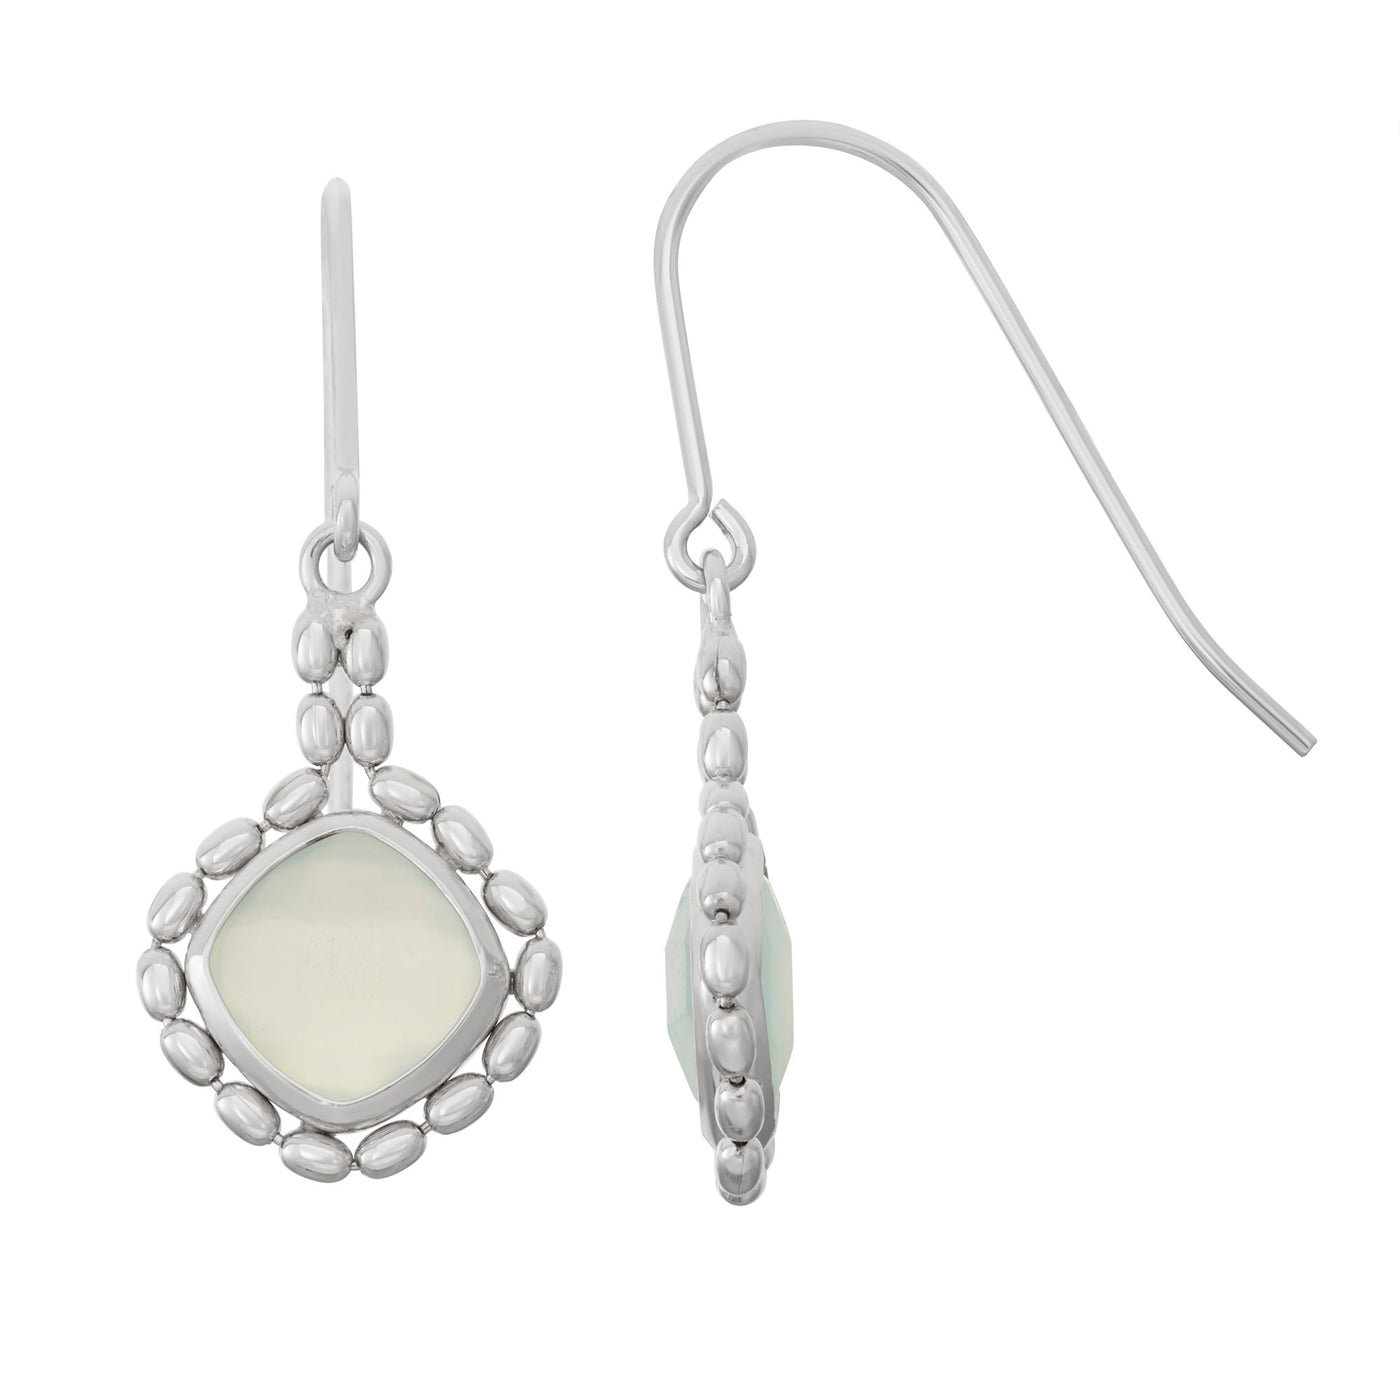 Rebecca Sloane Silver Beads Earring With Chalcedony Square Stone